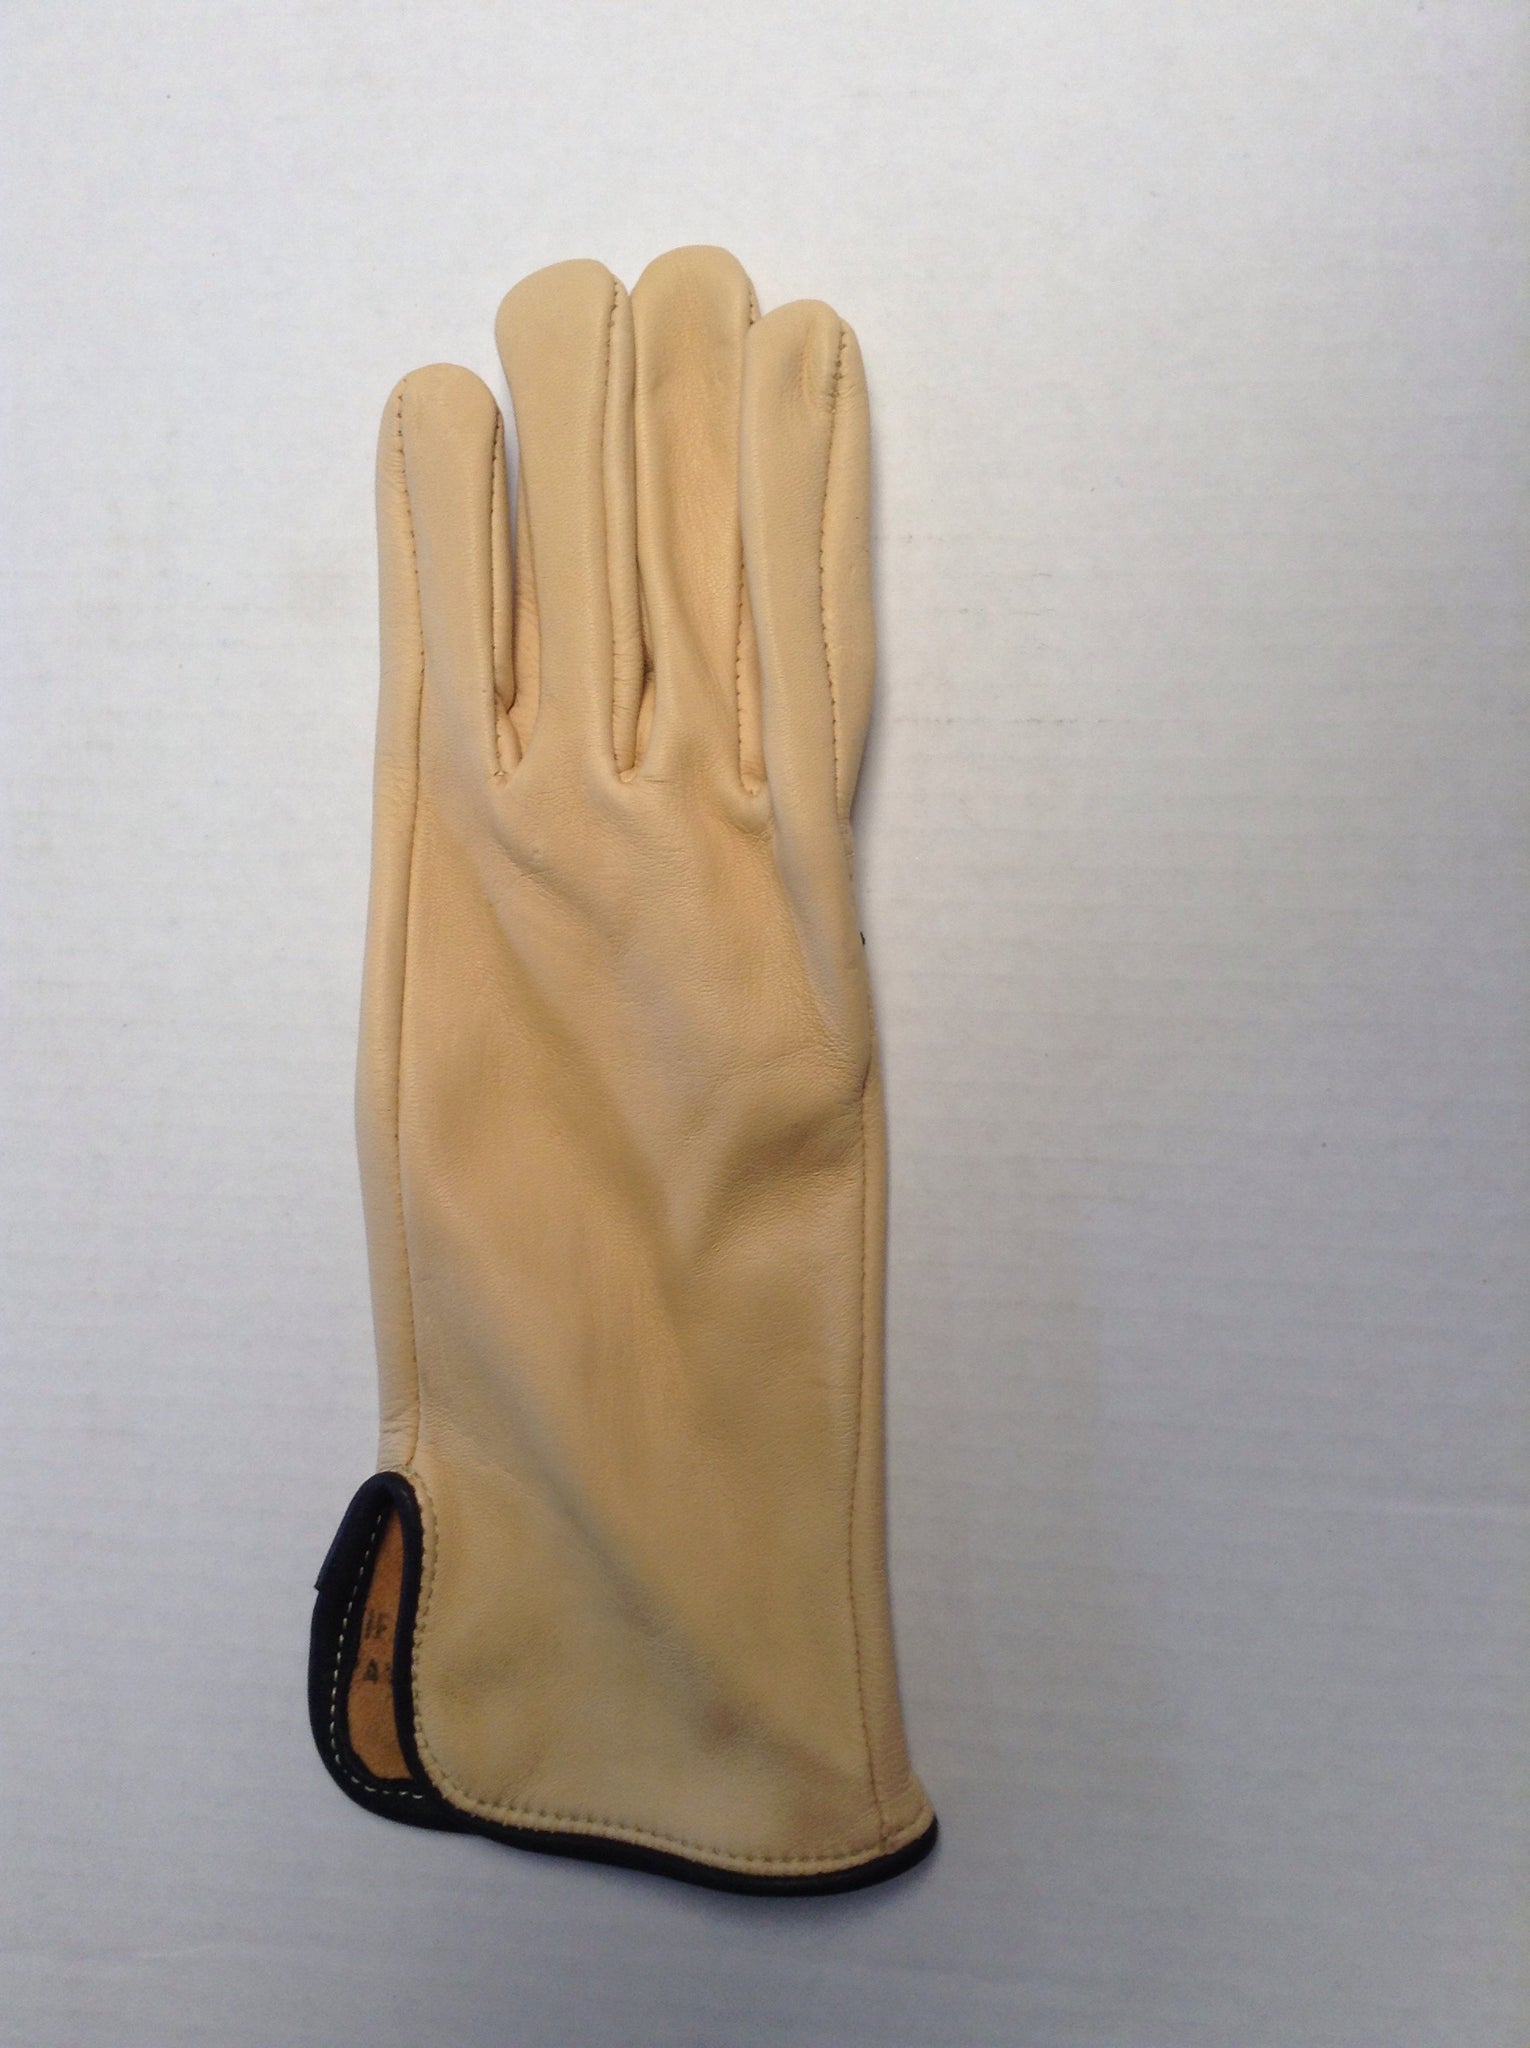 Bull Riding Glove - Tiffany Bull Riding Glove - TIFFANY - Mock Brothers Saddlery and Western Wear